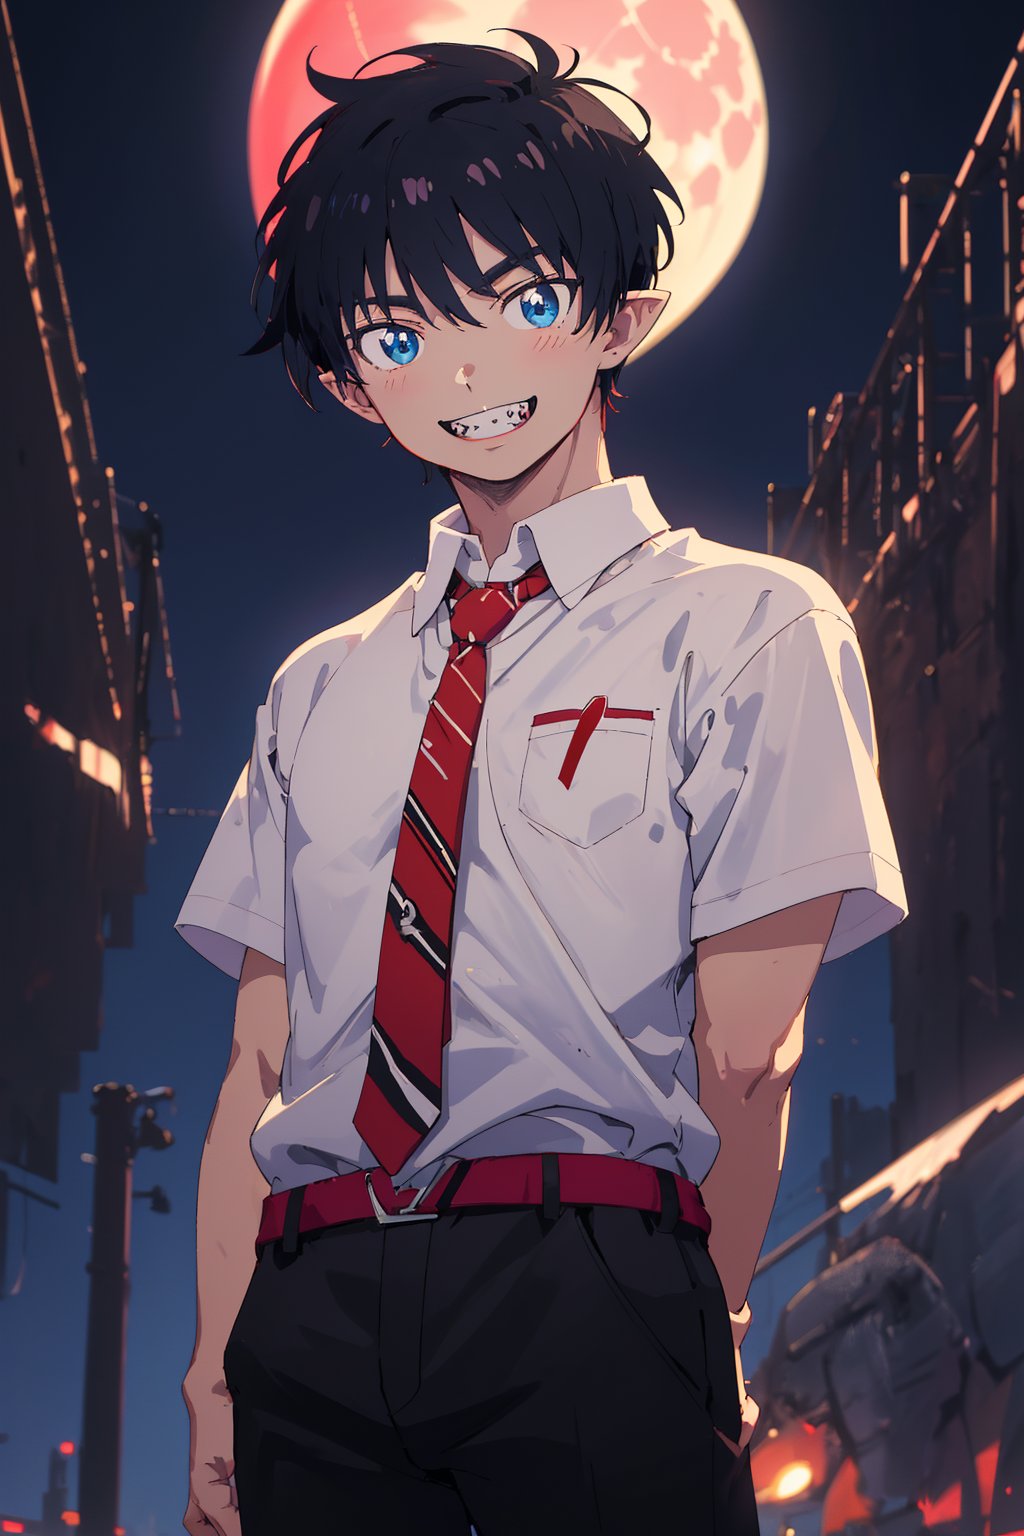 Blue king, Short hair, Black hair, Blue eyes 
ADDCOL 

Masterpiece, best quality, best hires, 4k,detailed, anime style, from front, upper body , looking at viewer 

BREAK 

1boy,solo,teenager boy, short hair , black hair,intense eyes, blue eyes {red pupils} ,sharper-looking teeth, slightly pointed ears,  flushed cheeks, slender body type, hands behind / arms behind back, expressive pose, (happy_face:1.2)

BREAK

wears {{white shirt, Short sleeves, red necktie, black pants, red boots }} 

BREAK 
Night, red full moon, 

